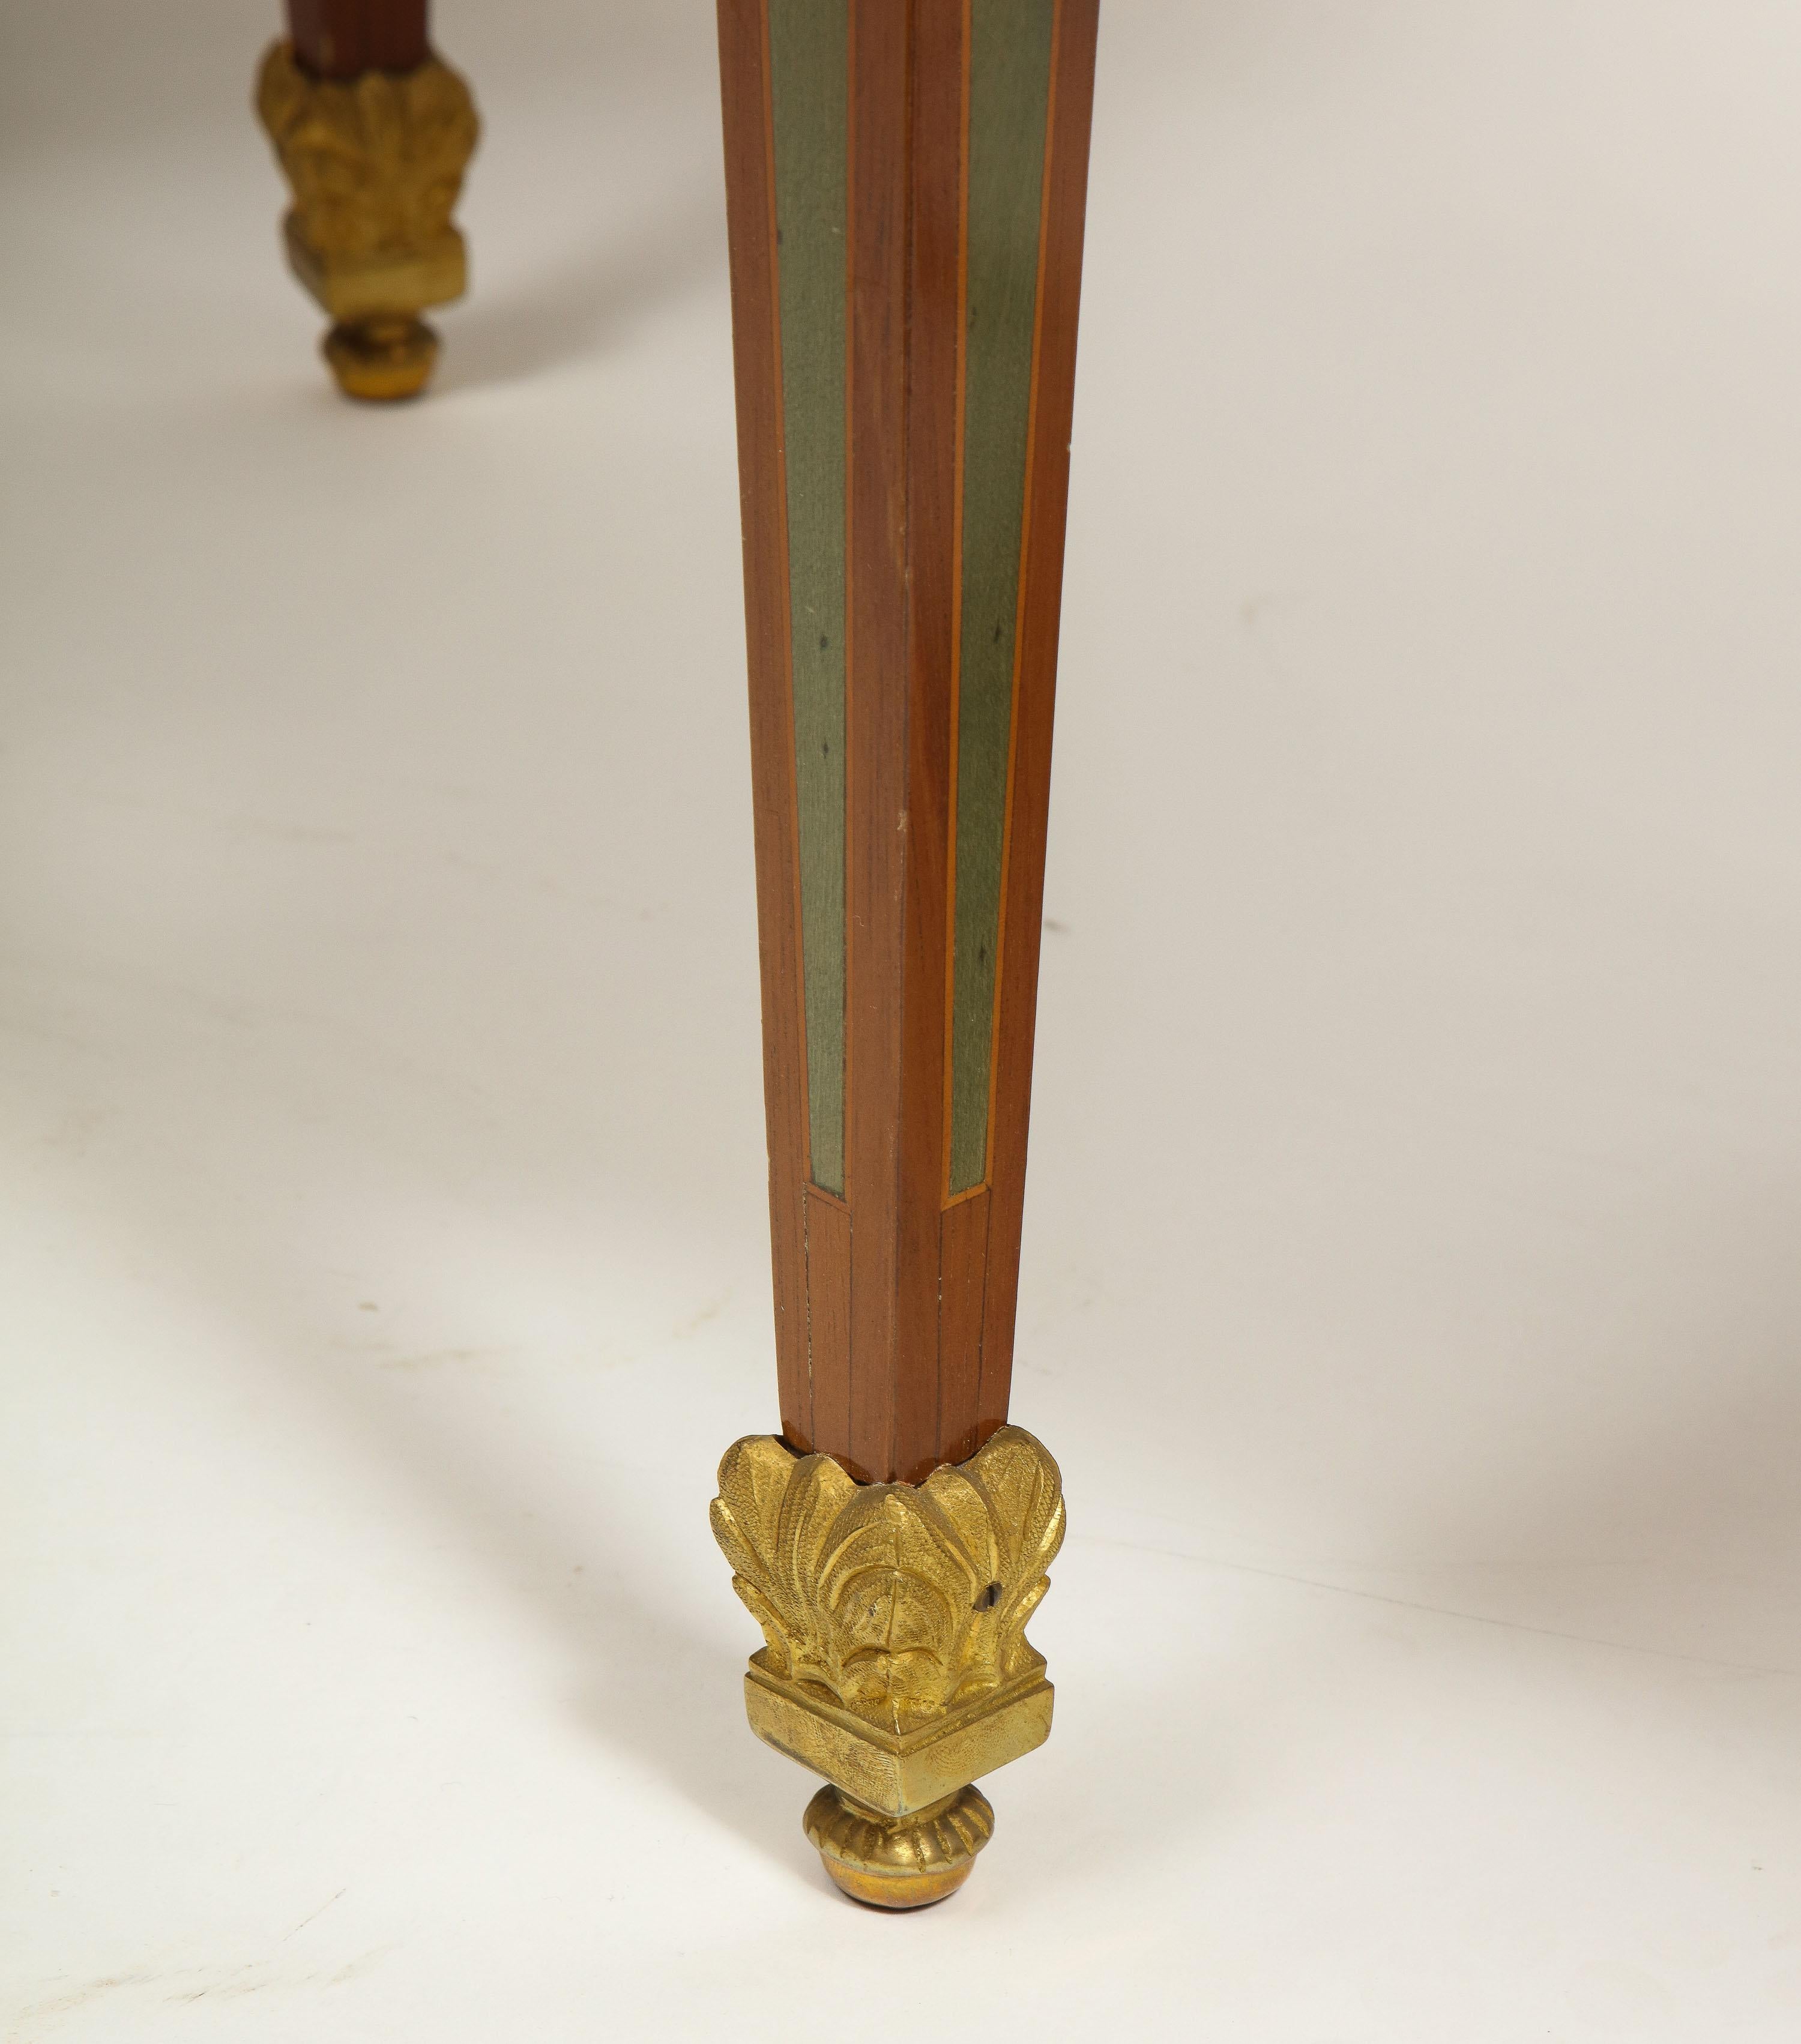 Exceptional Pair of French Ormolu-Mounted Parquetry and Marquetry Side Tables For Sale 3